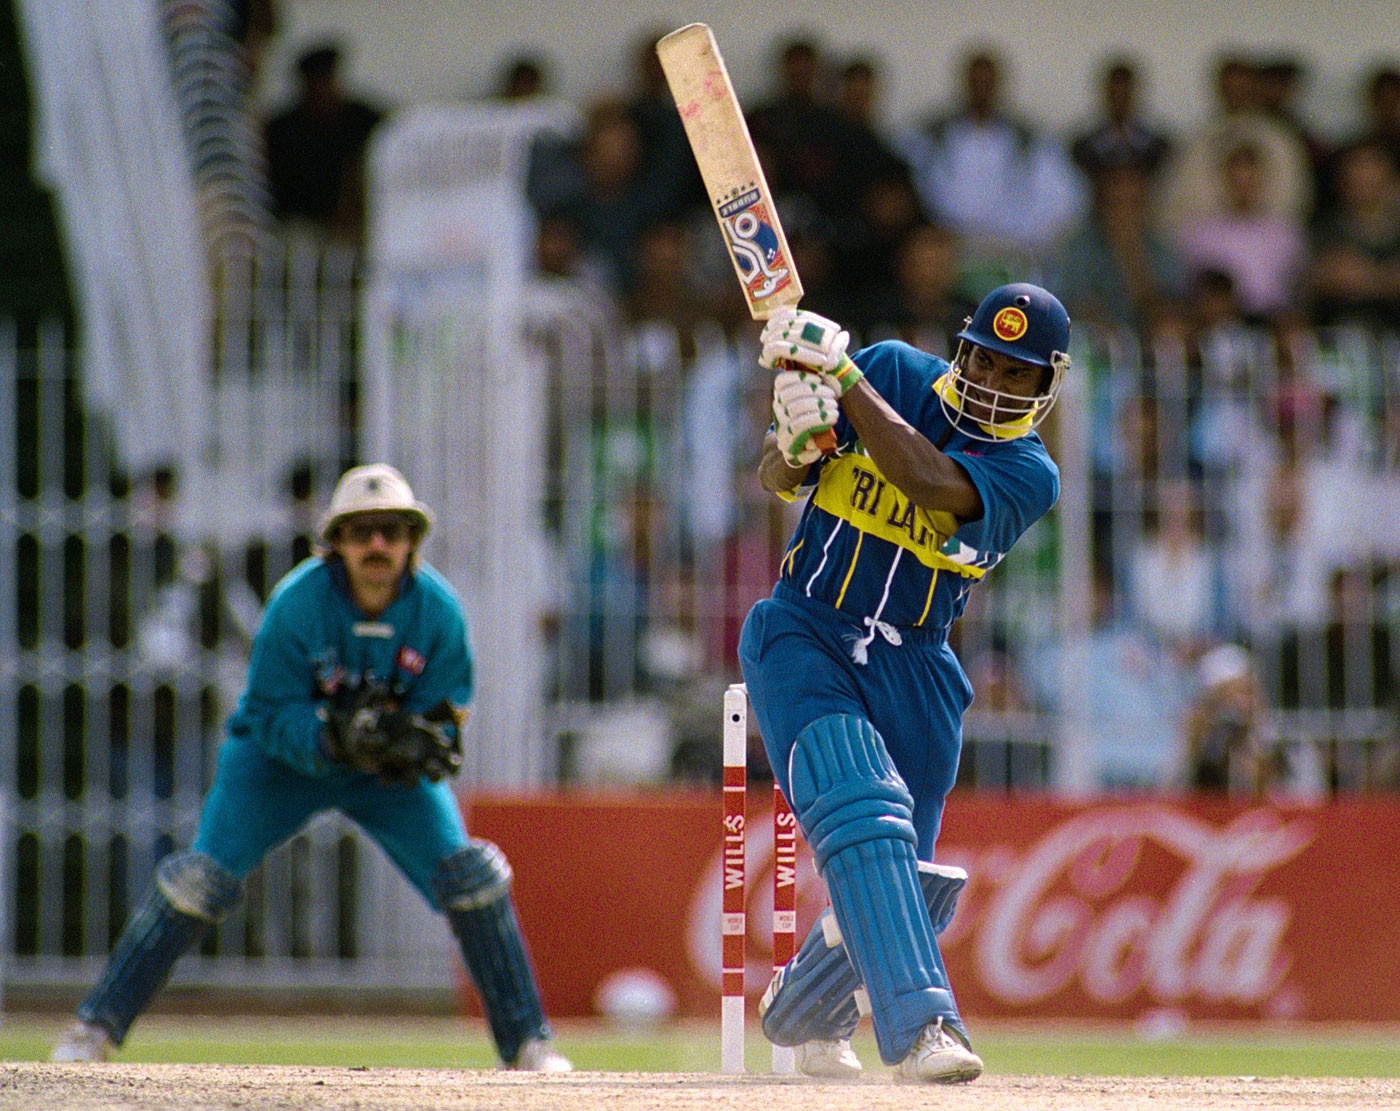 Sanath Jayasuriya is one of Sri Lanka's greatest cricketers and a member of its 1996 World Cup-winning team ©Getty Images